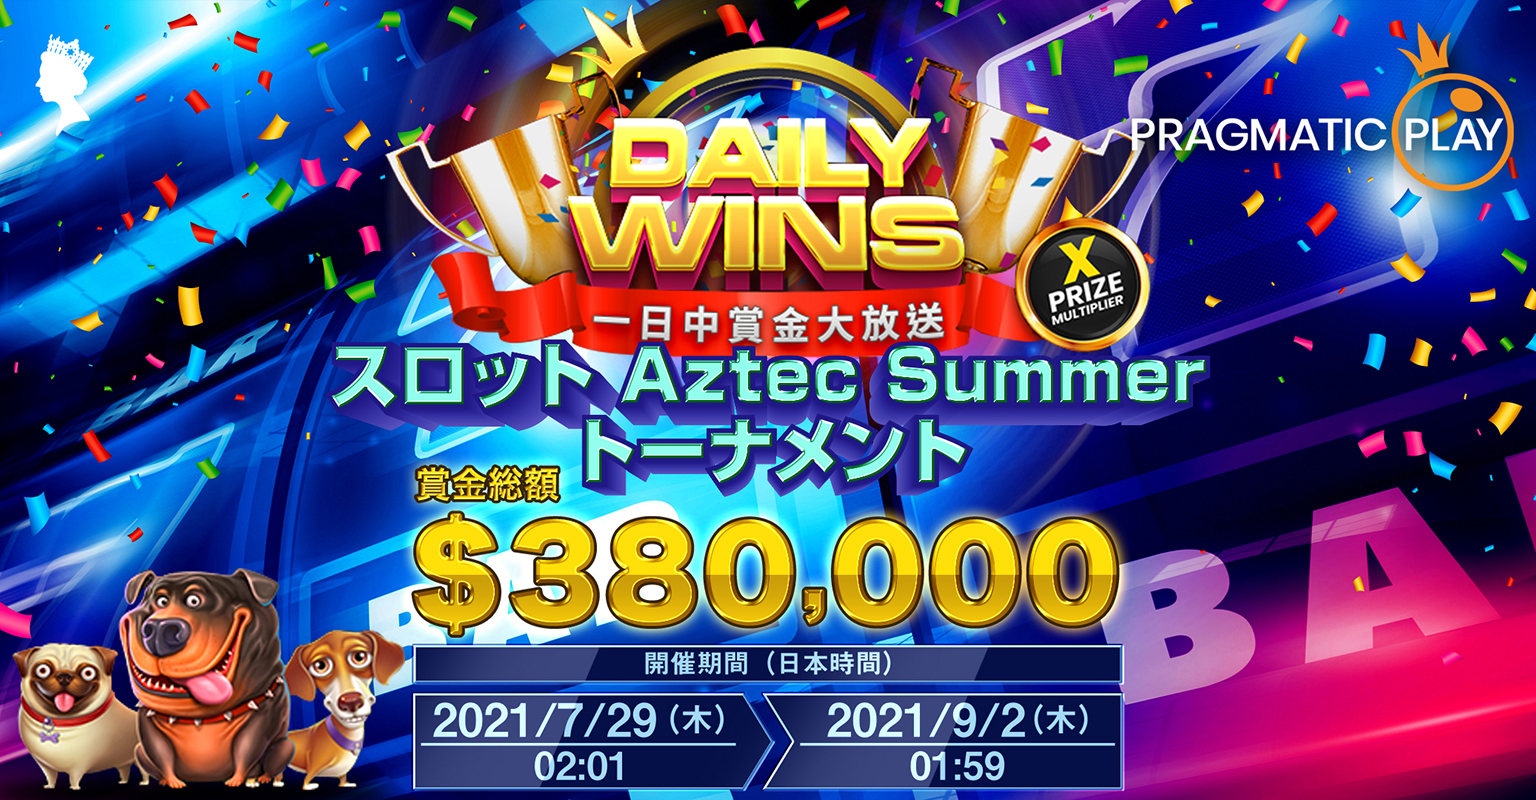 Play the selected Pragmatic Play slot games during Aztec Summer Tournament and have a chance to win a cash prize of up to $190,000. Start joining now!